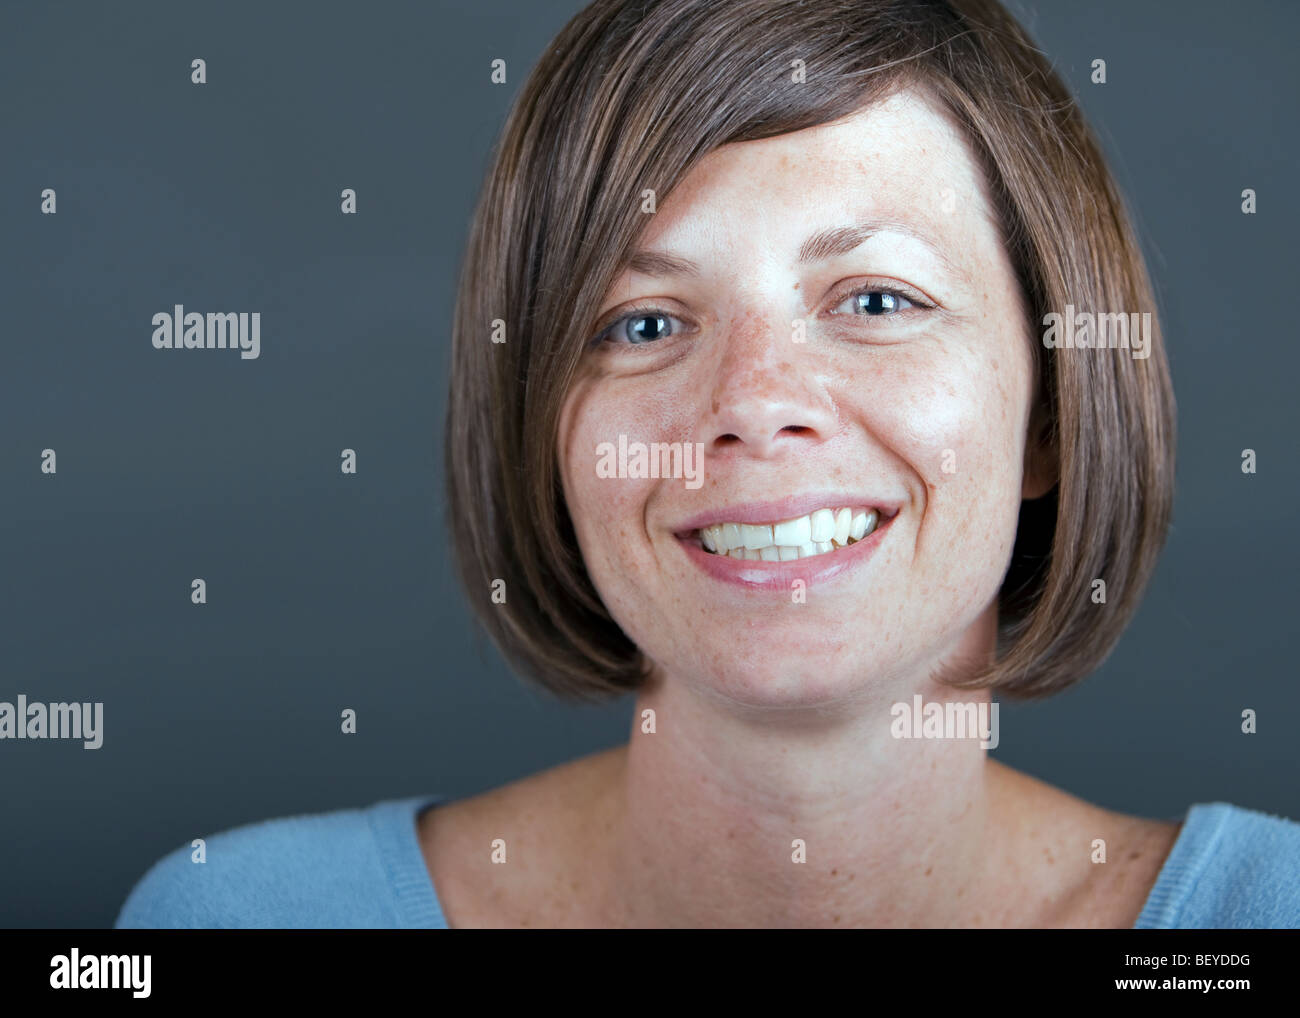 a beautiful smiling middle-aged woman Stock Photo